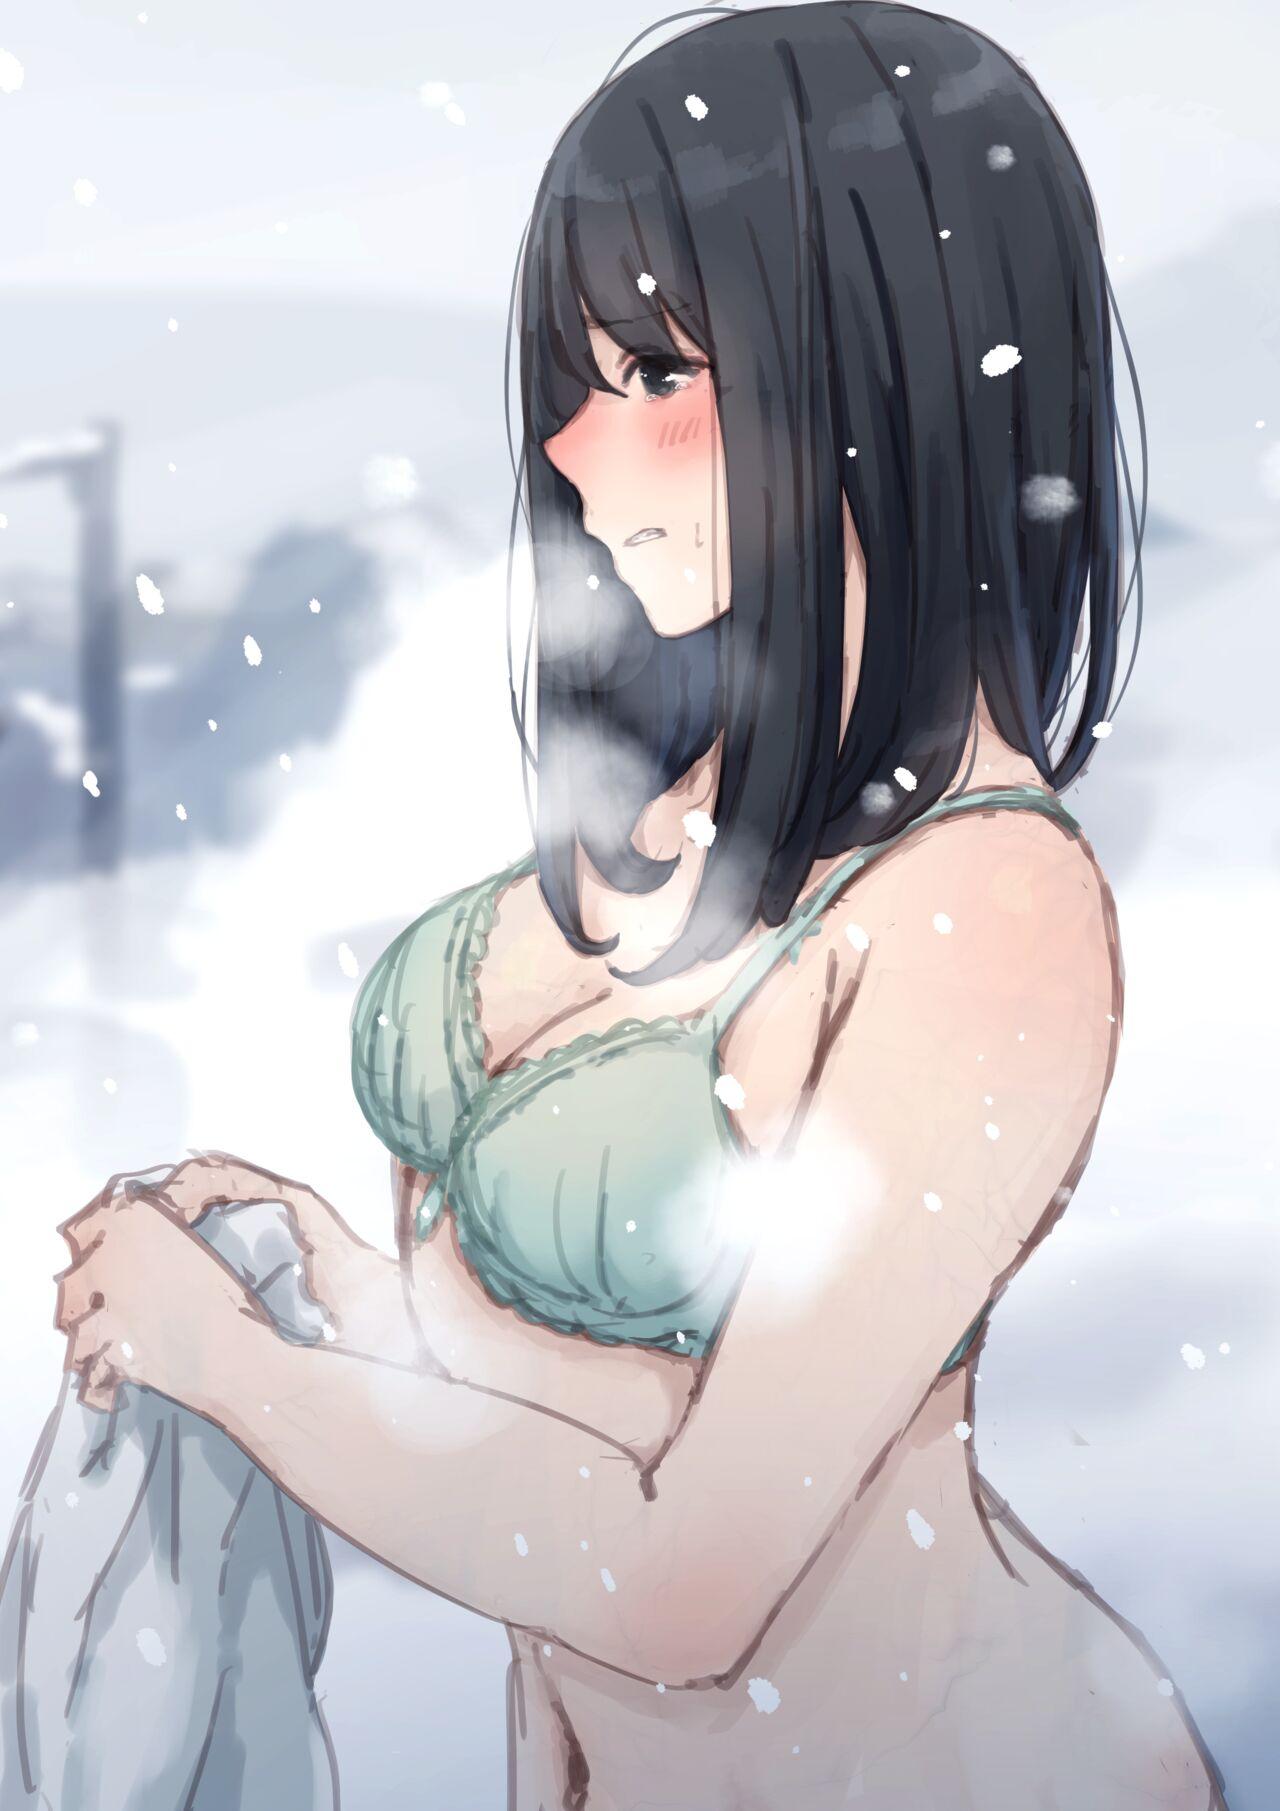 [Yukimuramaru] Public property Sex Slave Girl - Ex - Collection in the Snow - [Digital] [Ongoing] 65